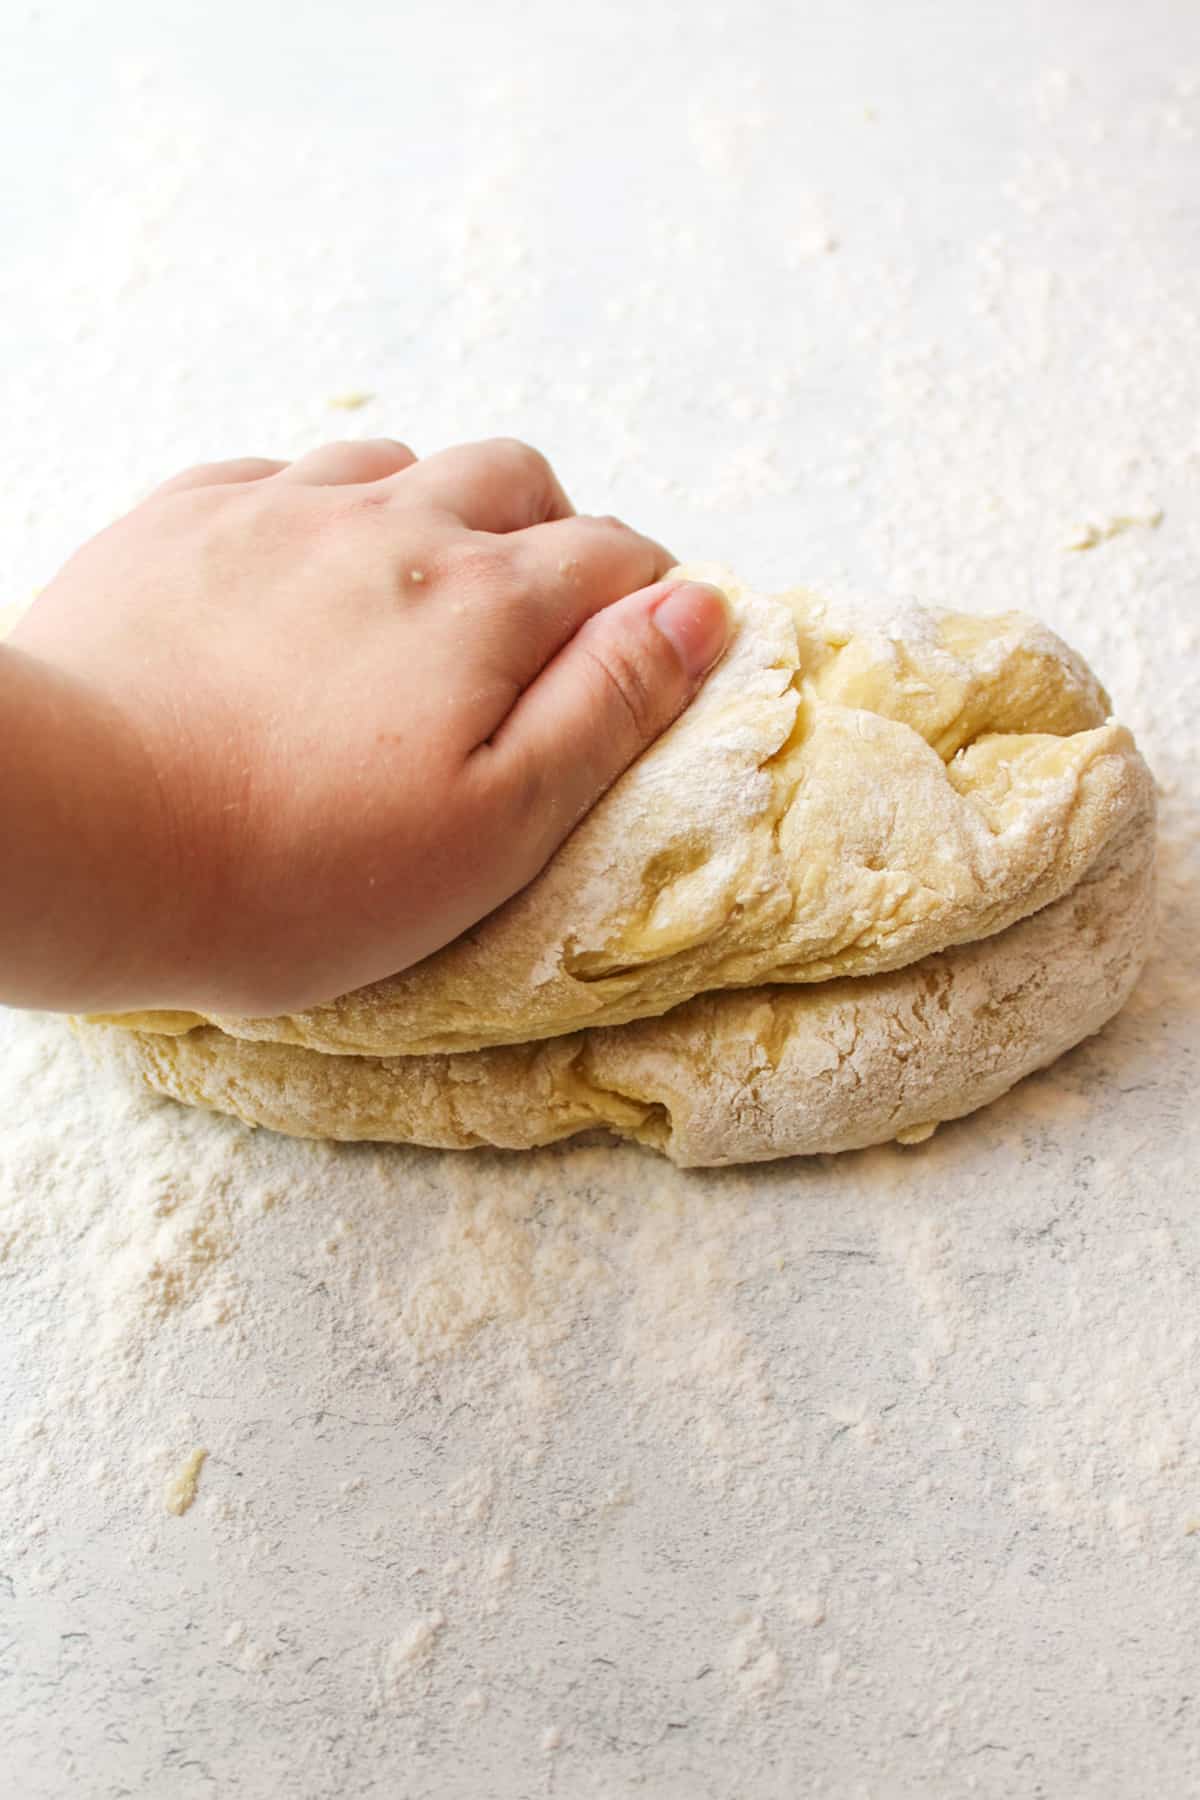 using a hand to spread he cinnamon over the dough